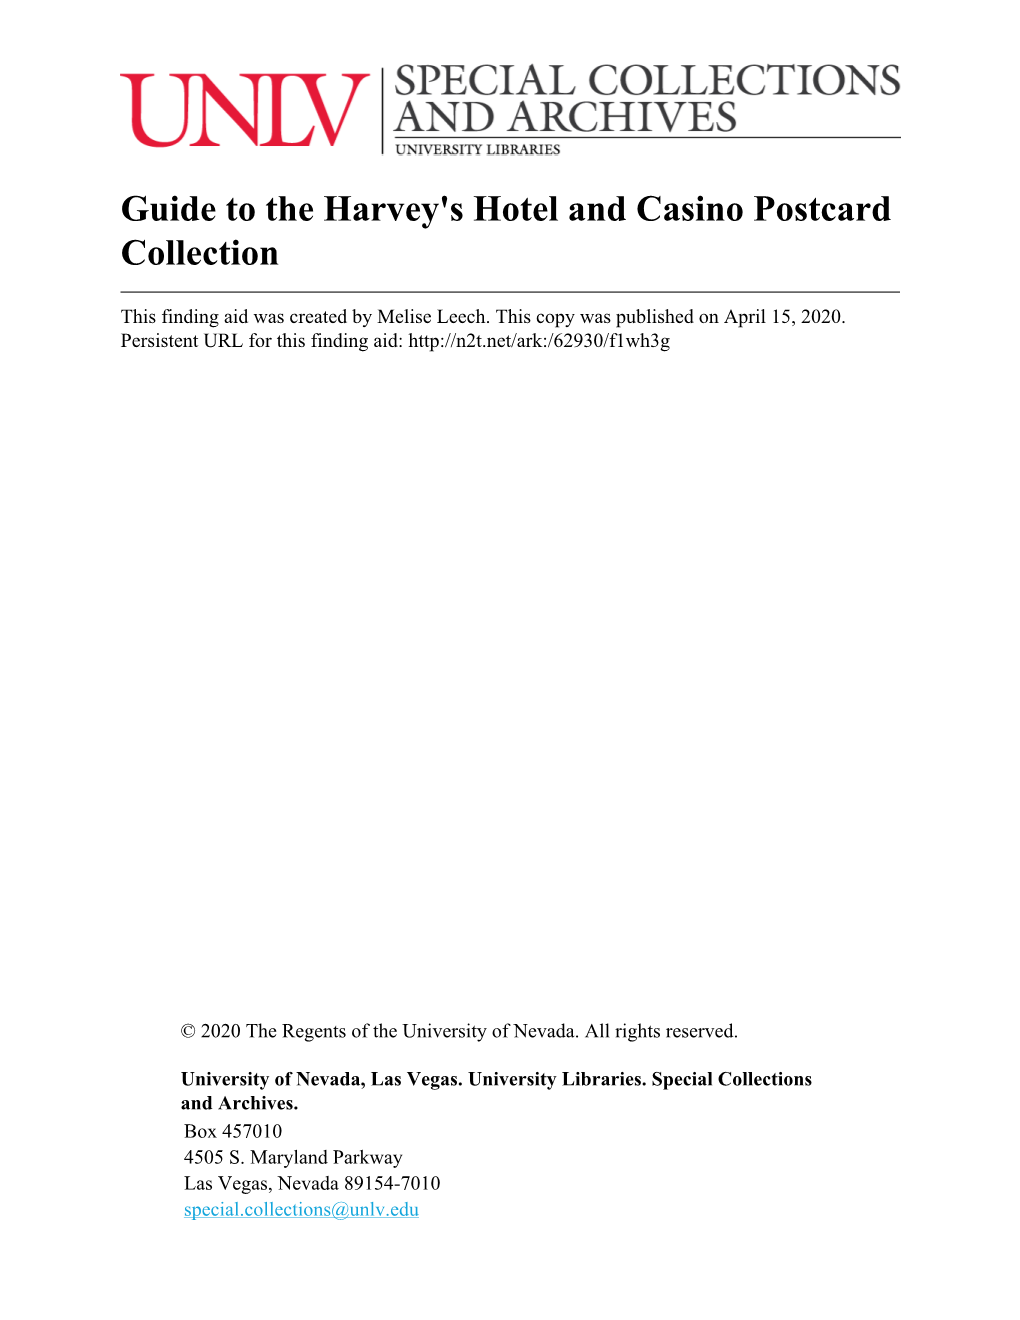 Guide to the Harvey's Hotel and Casino Postcard Collection